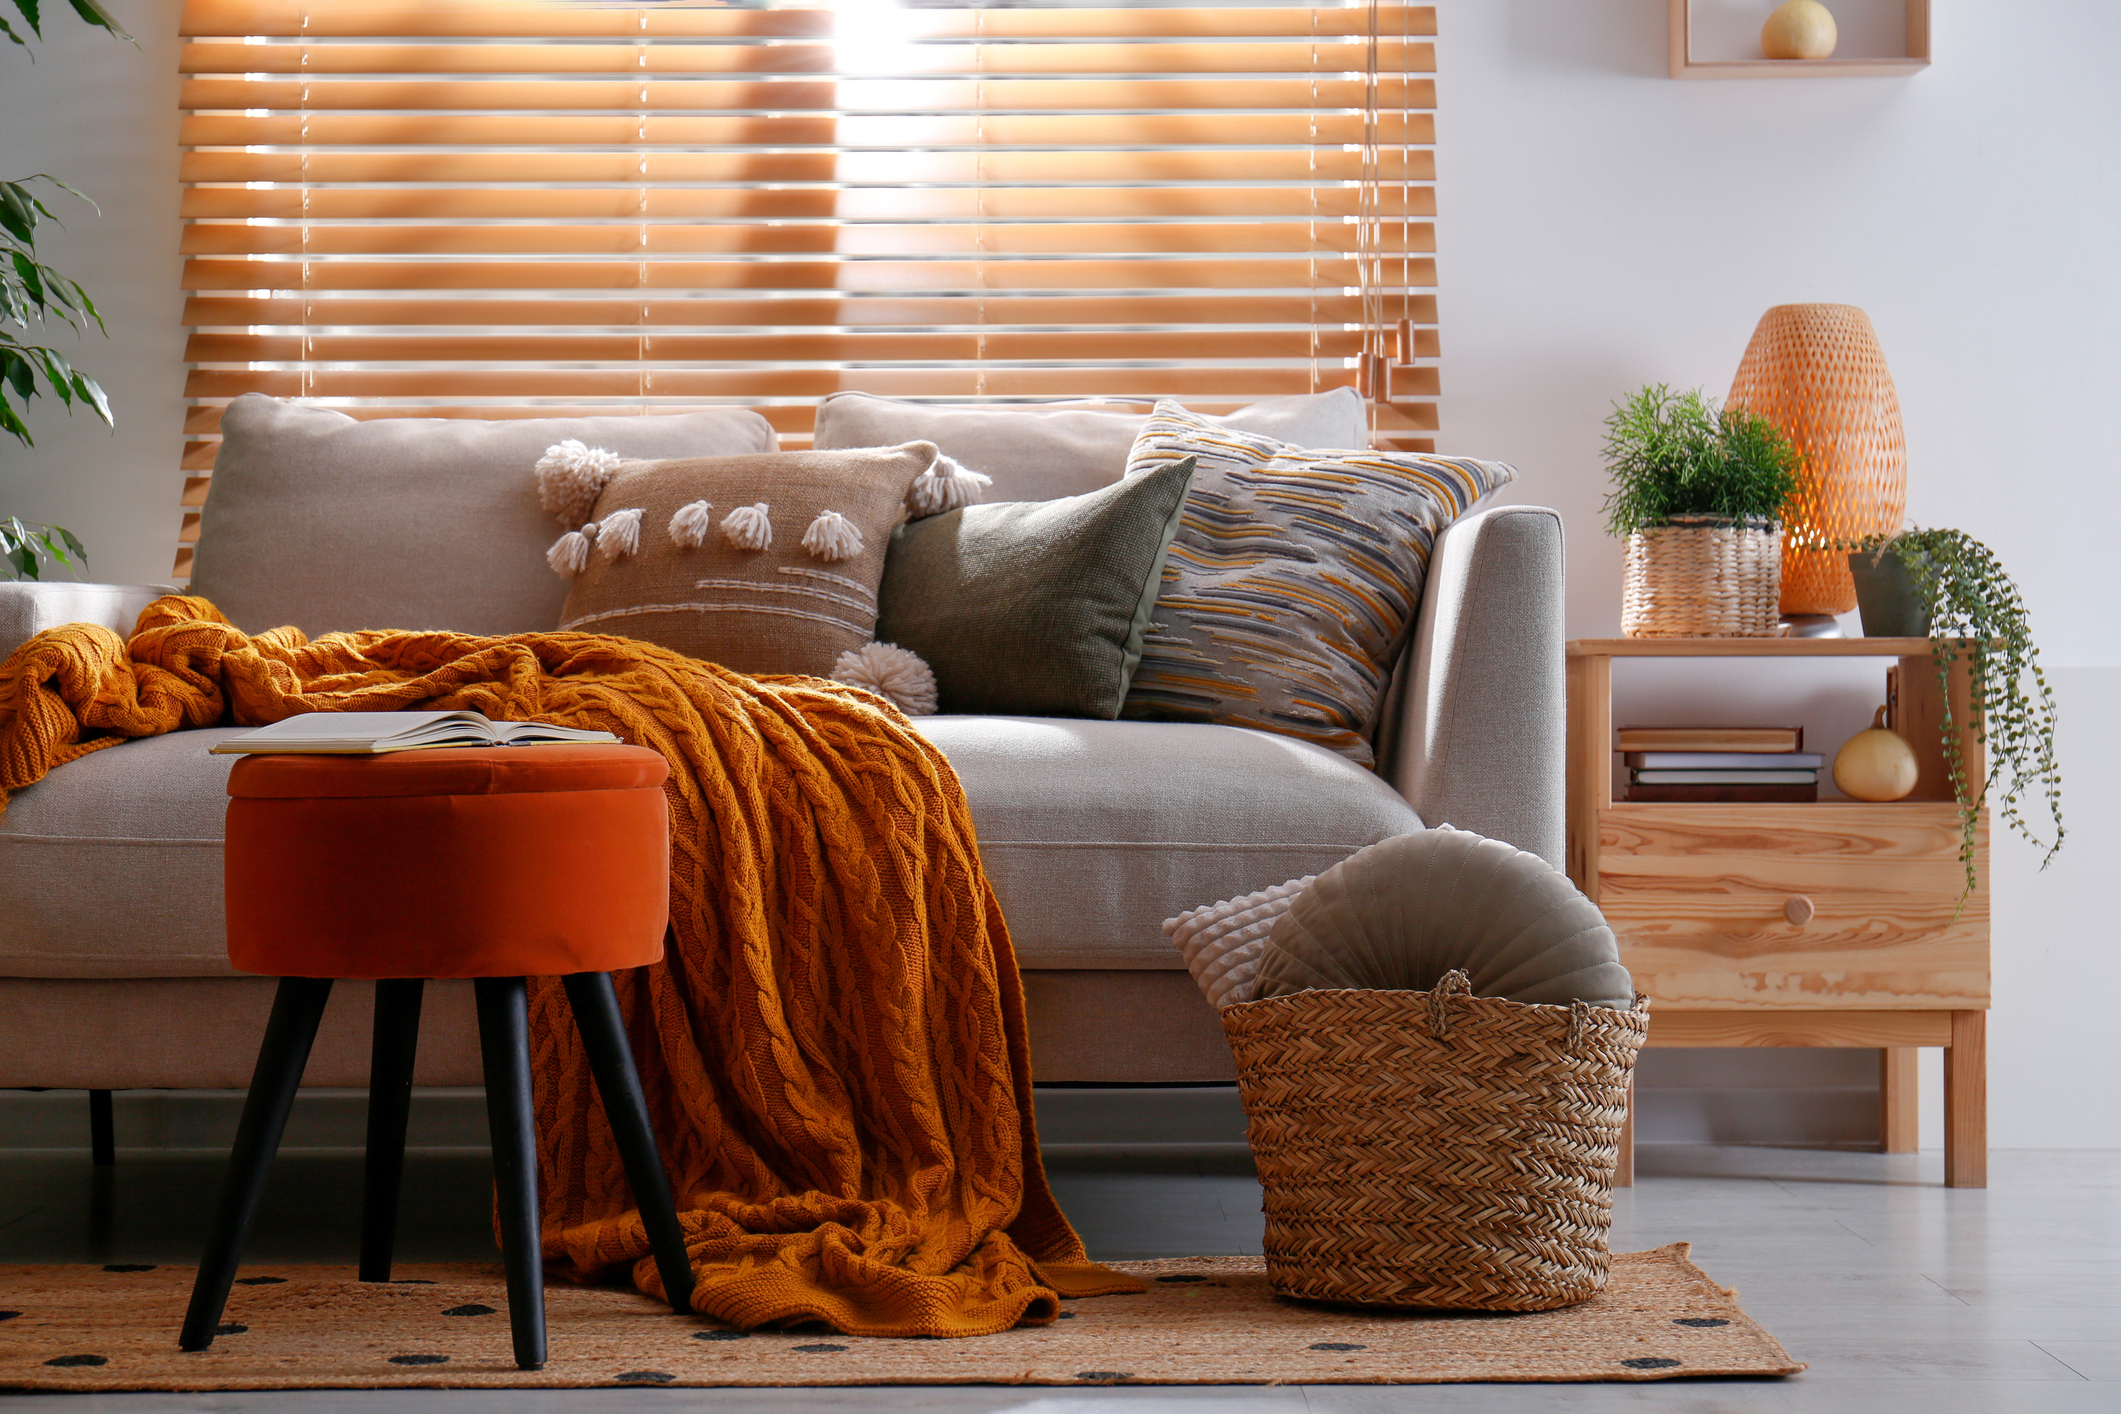 From pumpkin spice to everything nice: adding autumn flair to your home